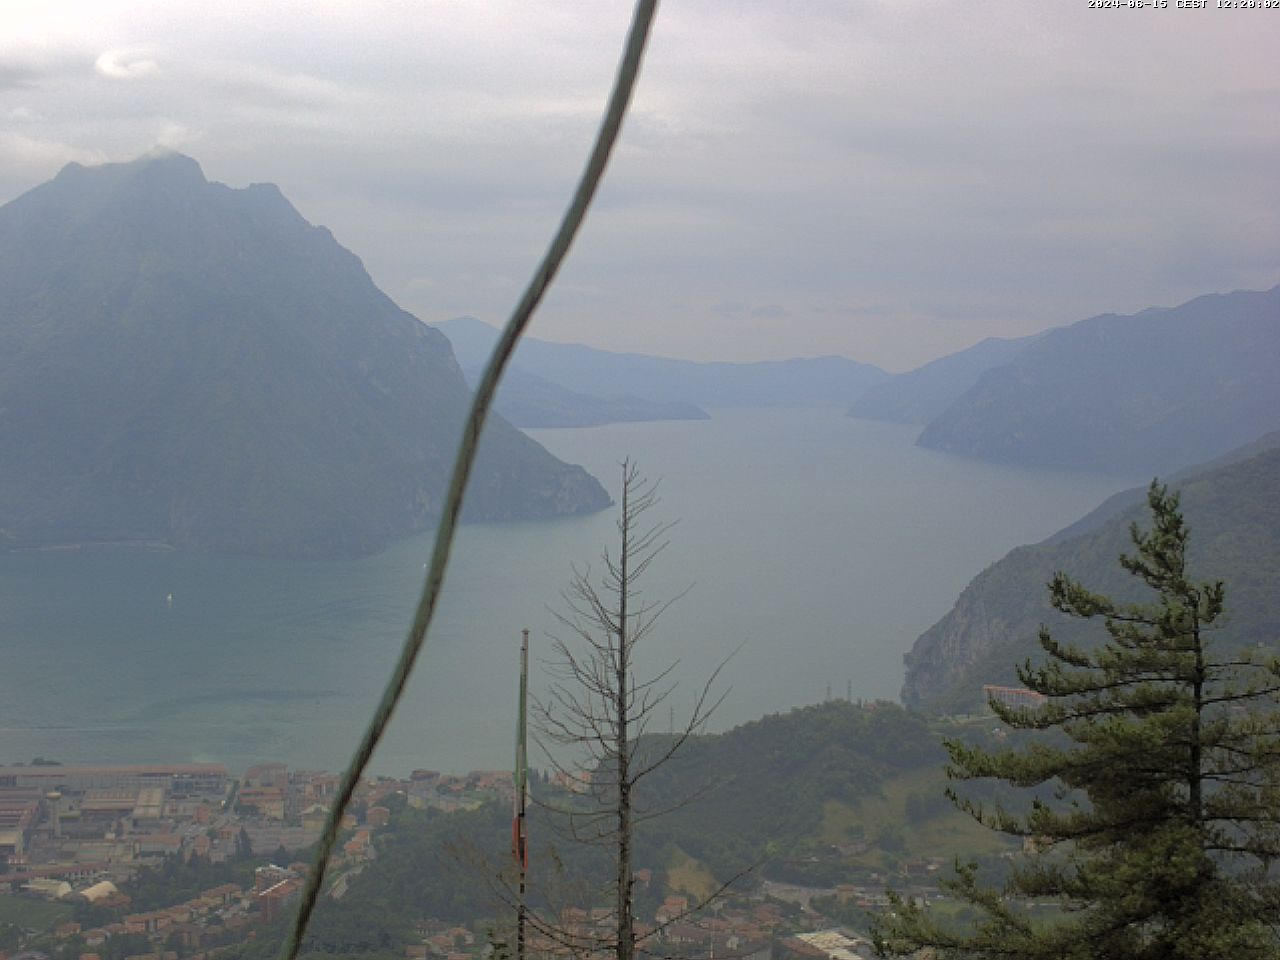 Lovere (Lac d'Iseo) Me. 12:29